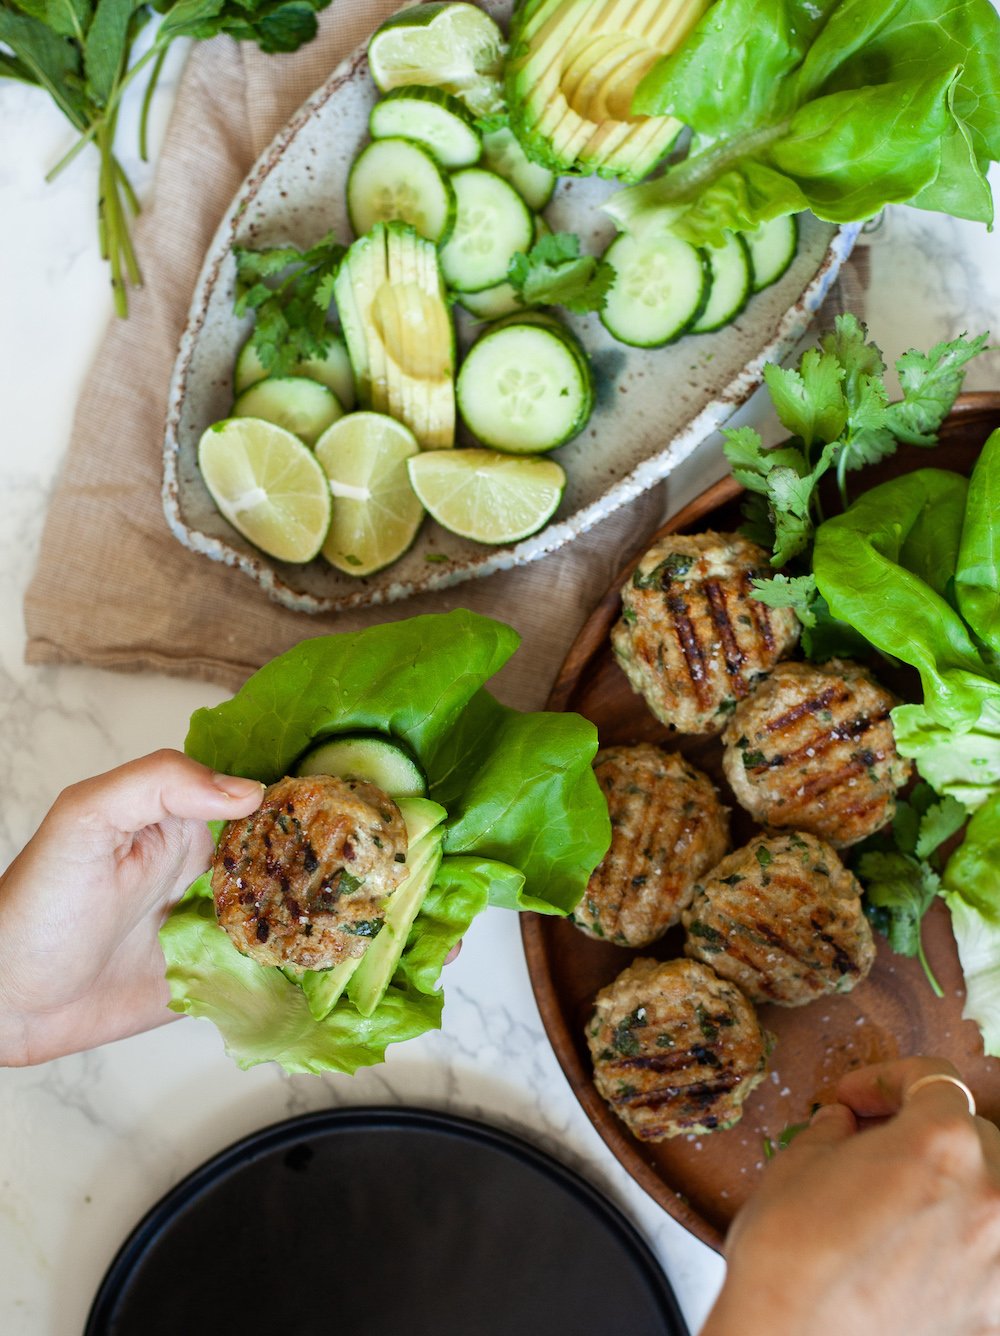 easy recipe for an Asian Spiecd Chicken Burger in a Lettuce Wrap gluten free, paleo, whole 30